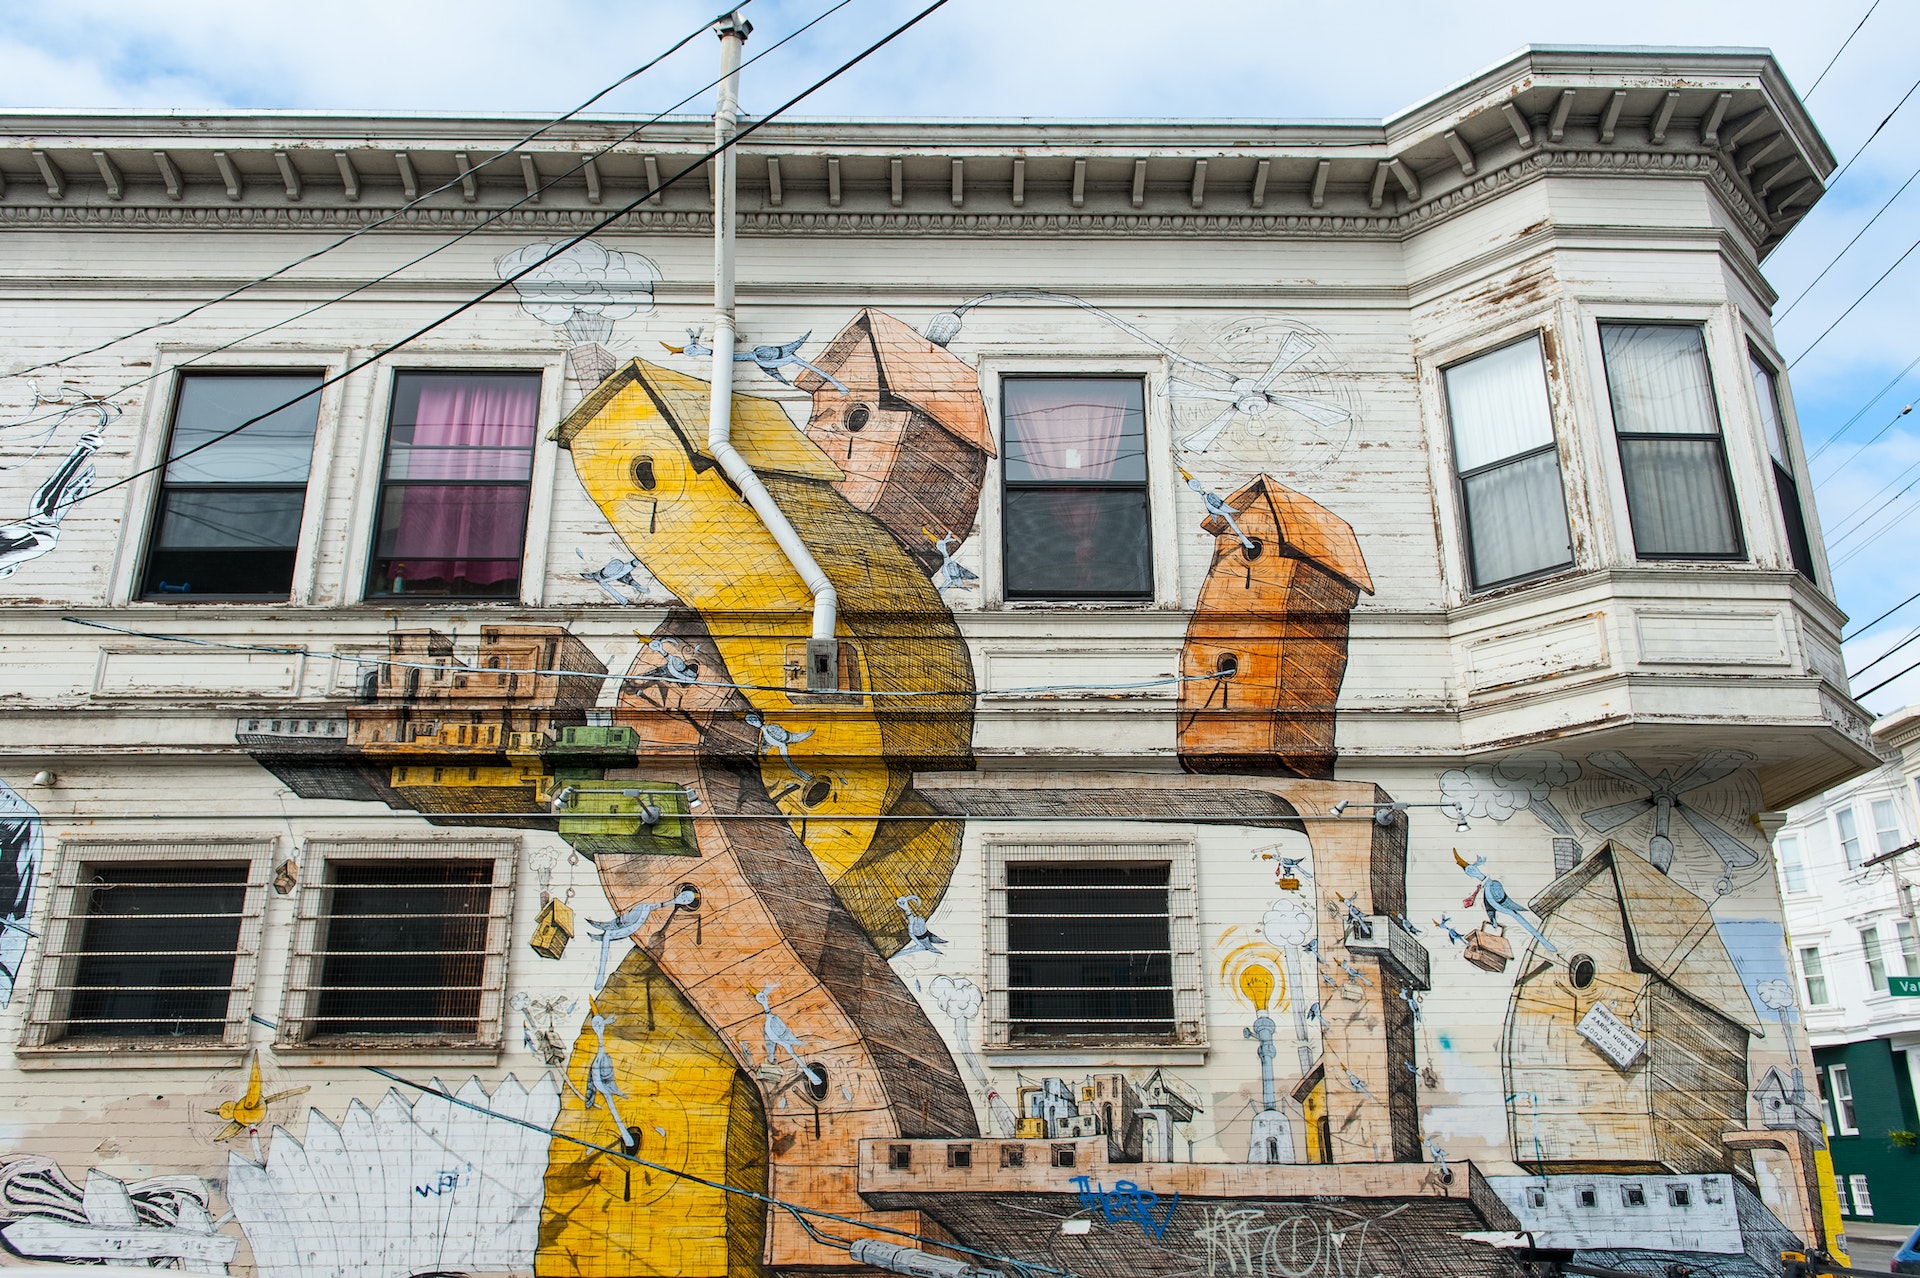 Mural in Mission District neighborhood in San Francisco